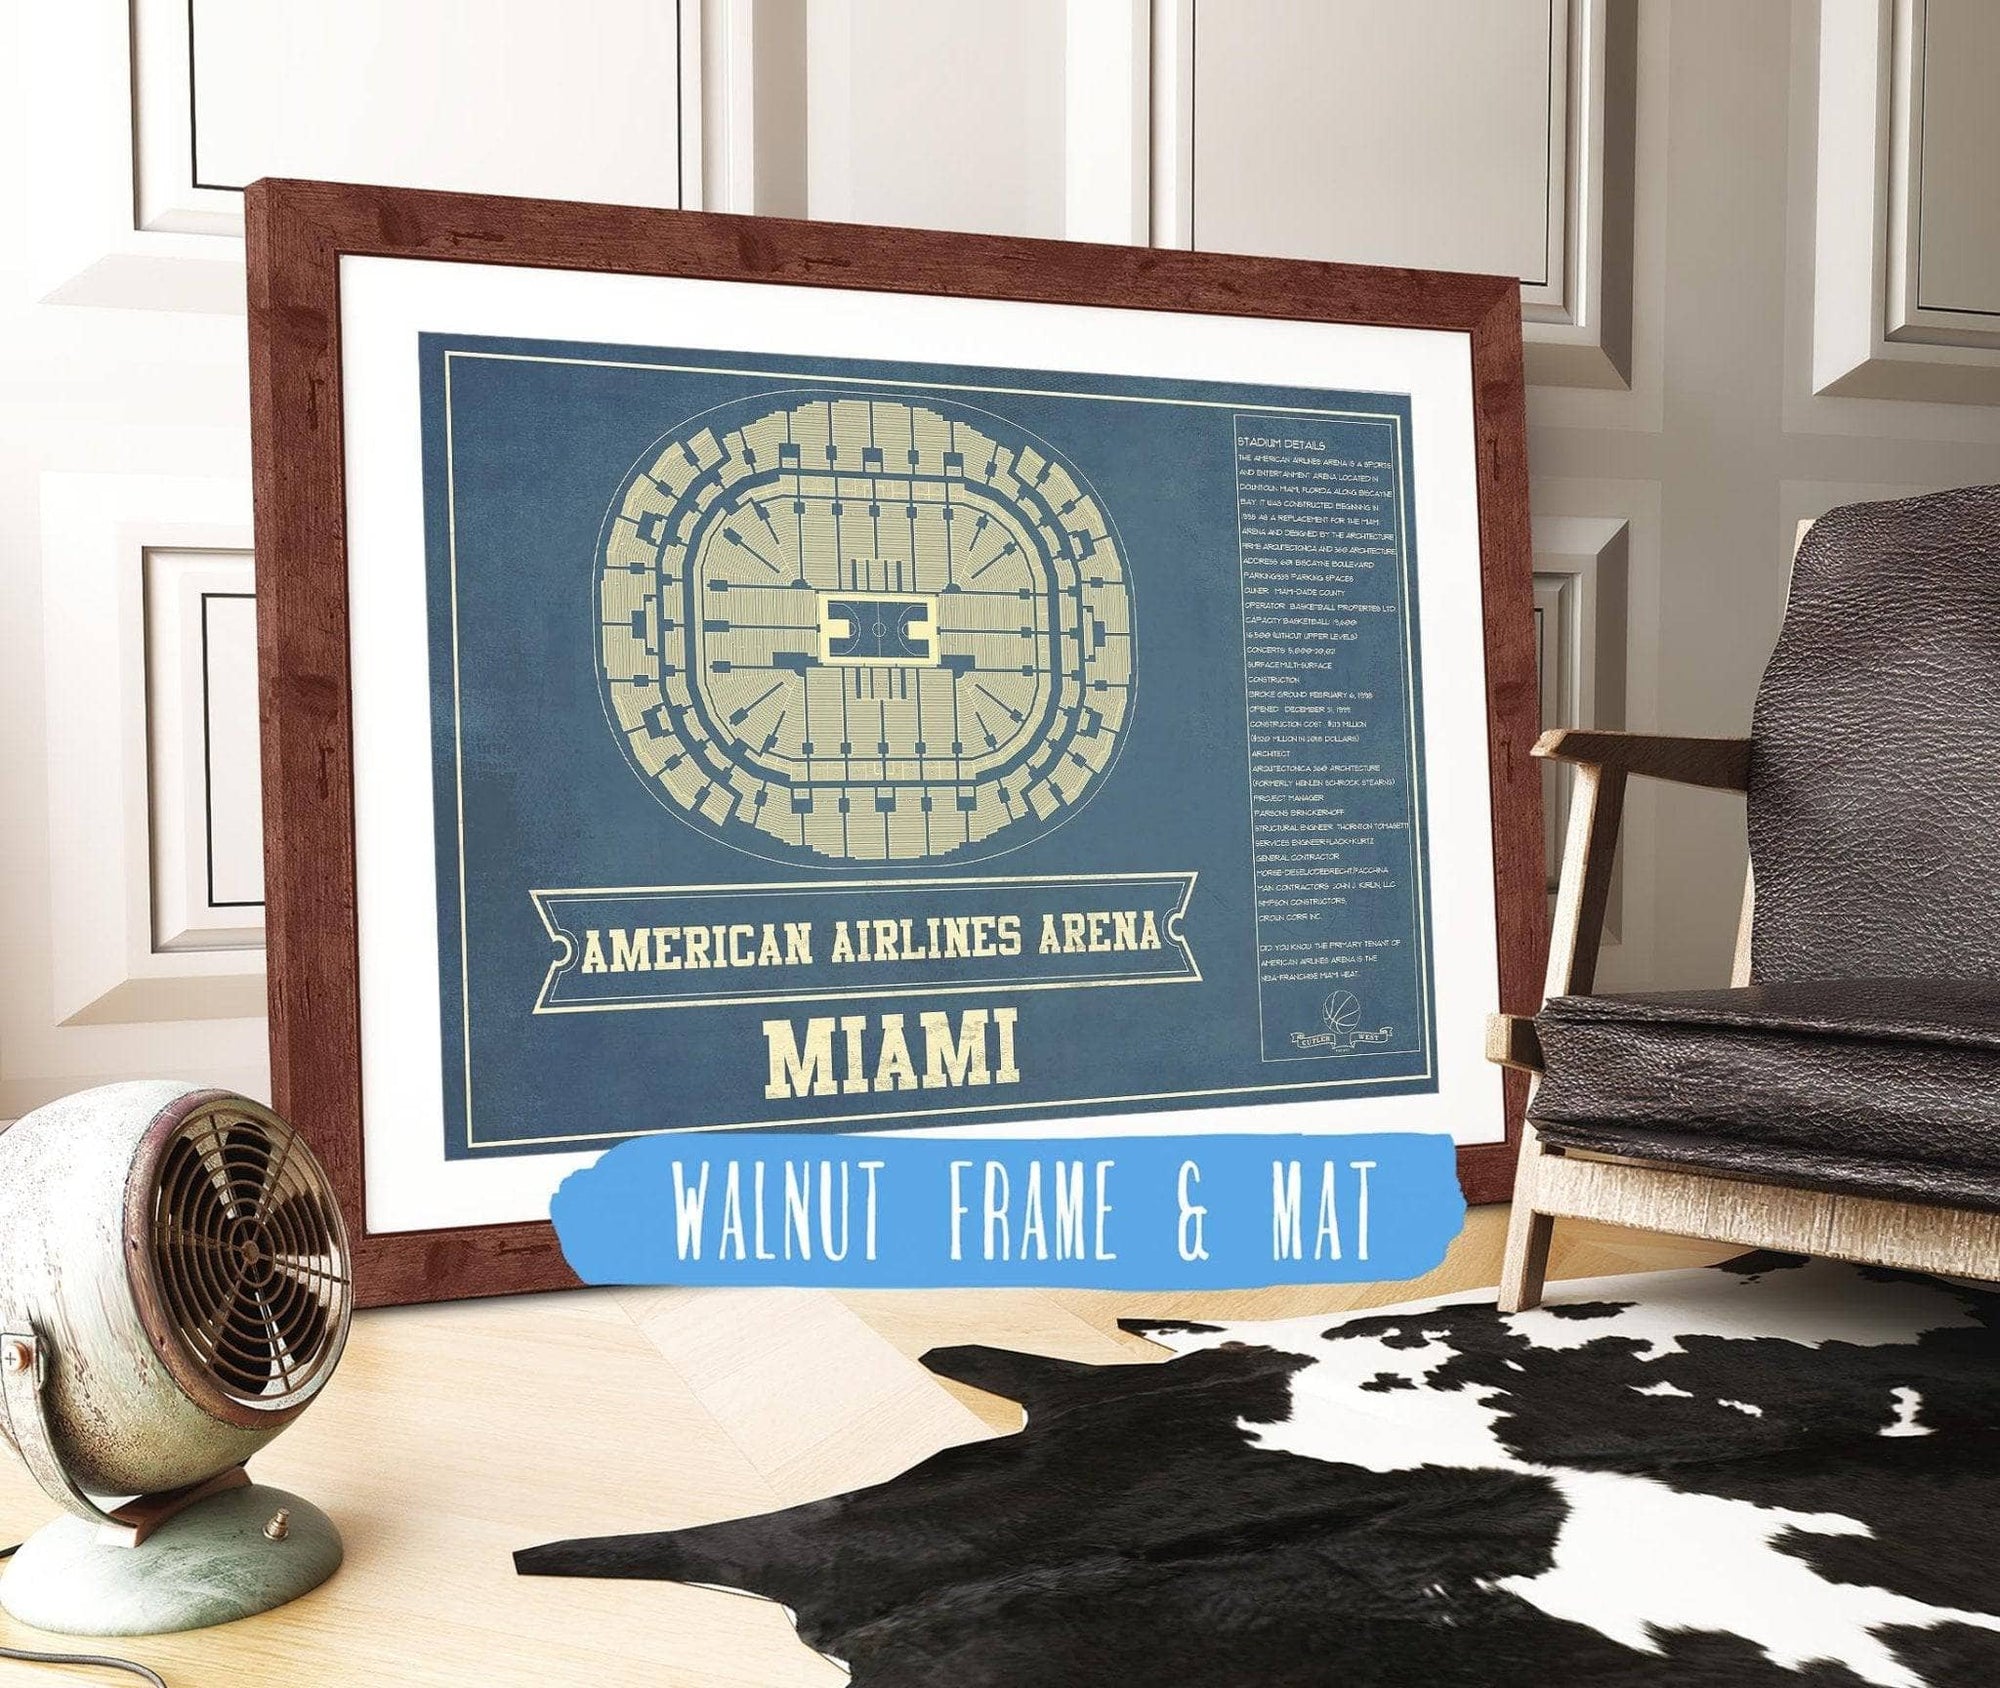 Cutler West Basketball Collection 14" x 11" / Walnut Frame Mat Miami Heat - American Airlines Arena Vintage Basketball Blueprint NBA Print 675082021_76831